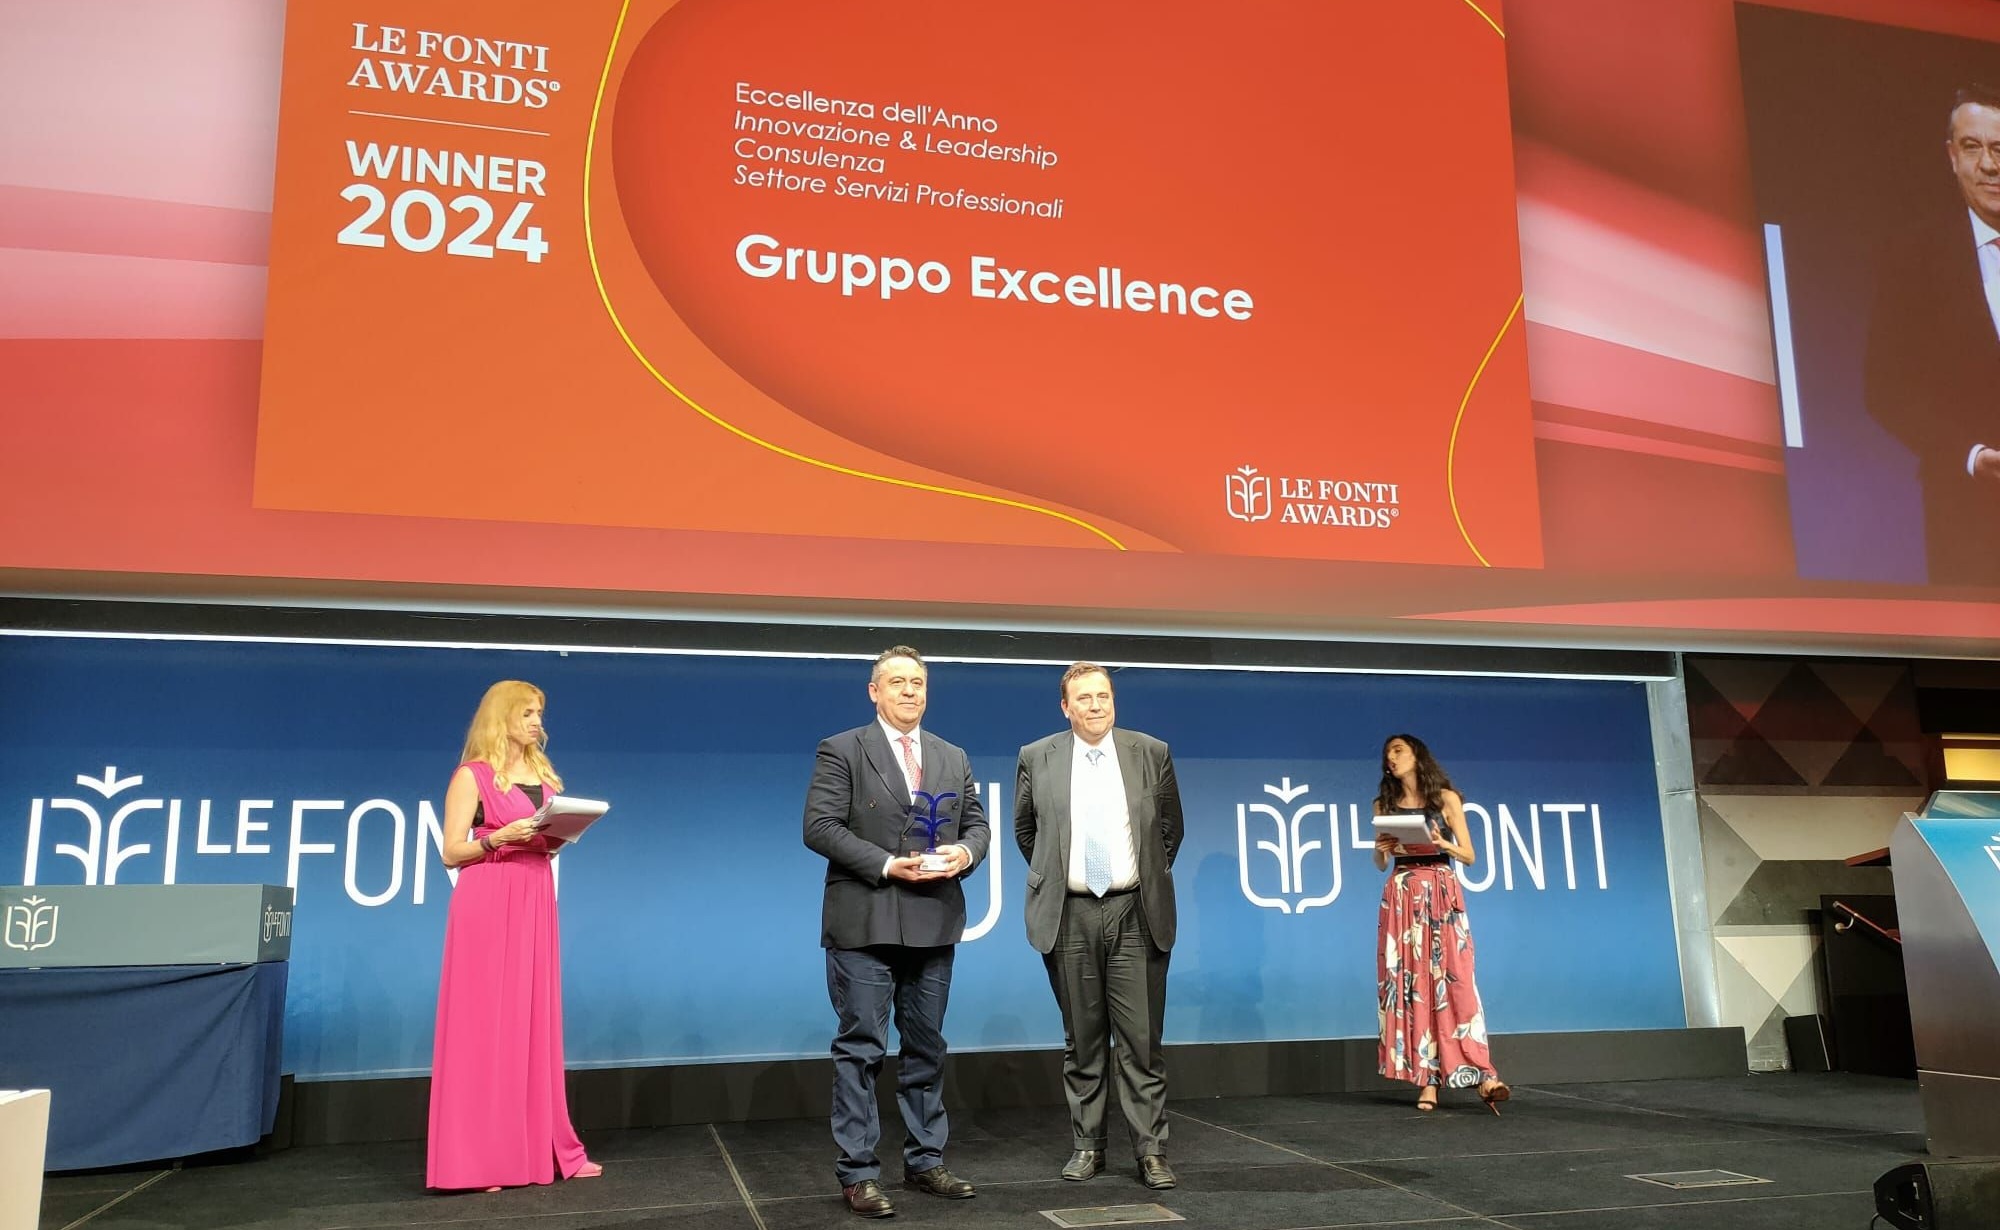 Le Fonti Awards,  Gruppo Excellence wins in the “Excellence of the Year – Innovation & Leadership” category